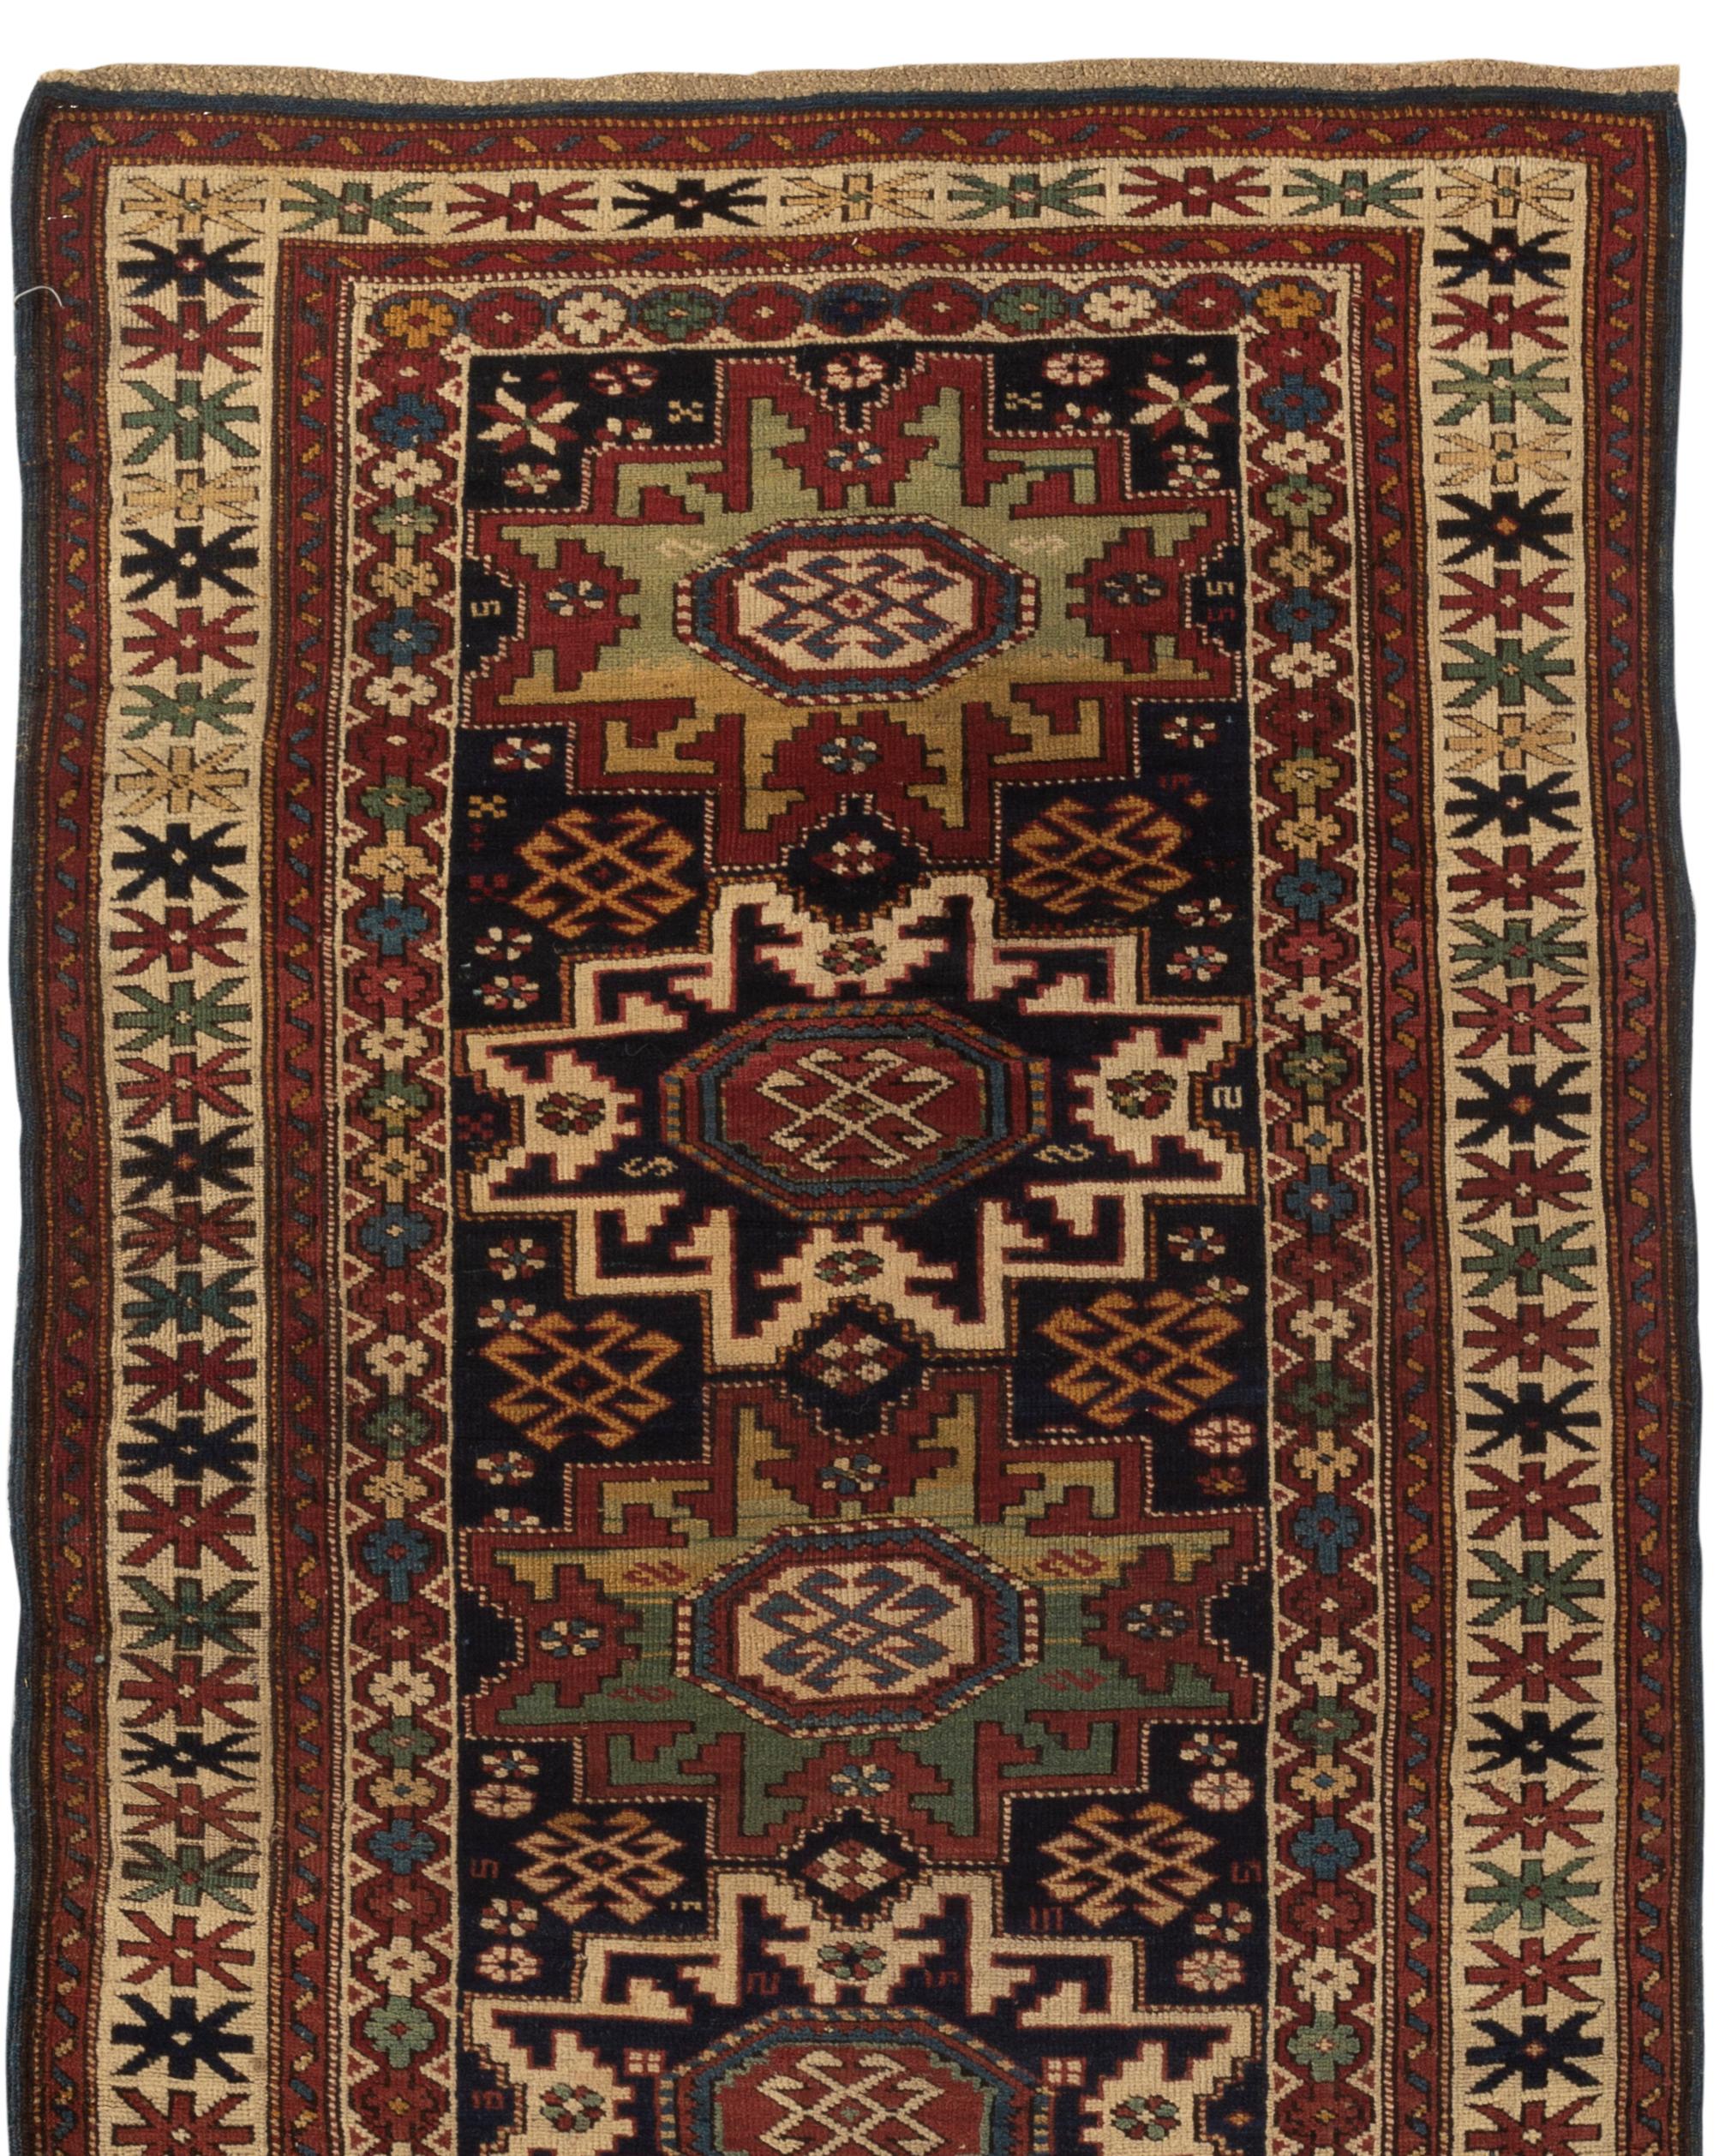 Antique Caucasian Lesghi Star rug, circa 1880, the central field with the four Lesghi star motifs two in navy and ivory and the others in shades of greens enclosed by multiple borders that set the frame for the central design in a very picturesque